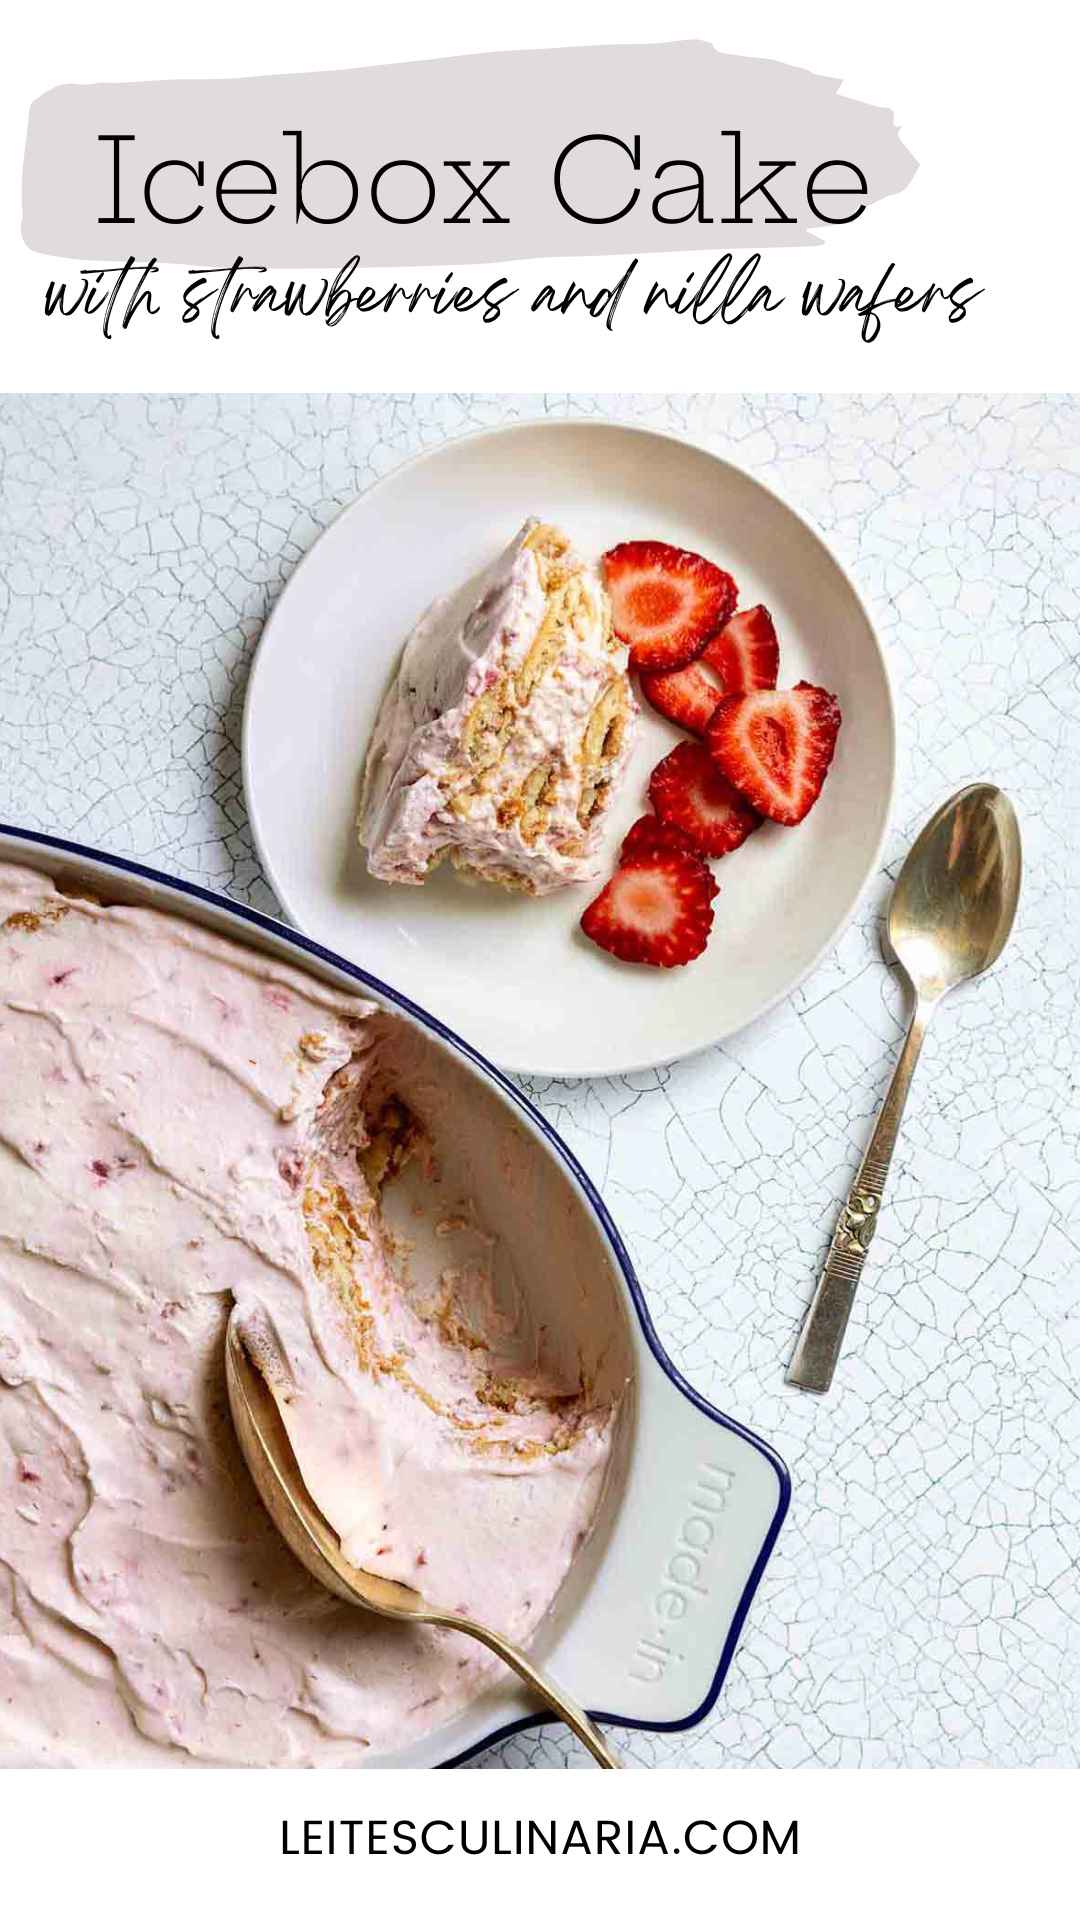 A oval dish filled with strawberry icebox cake with a serving on a plate next to it.